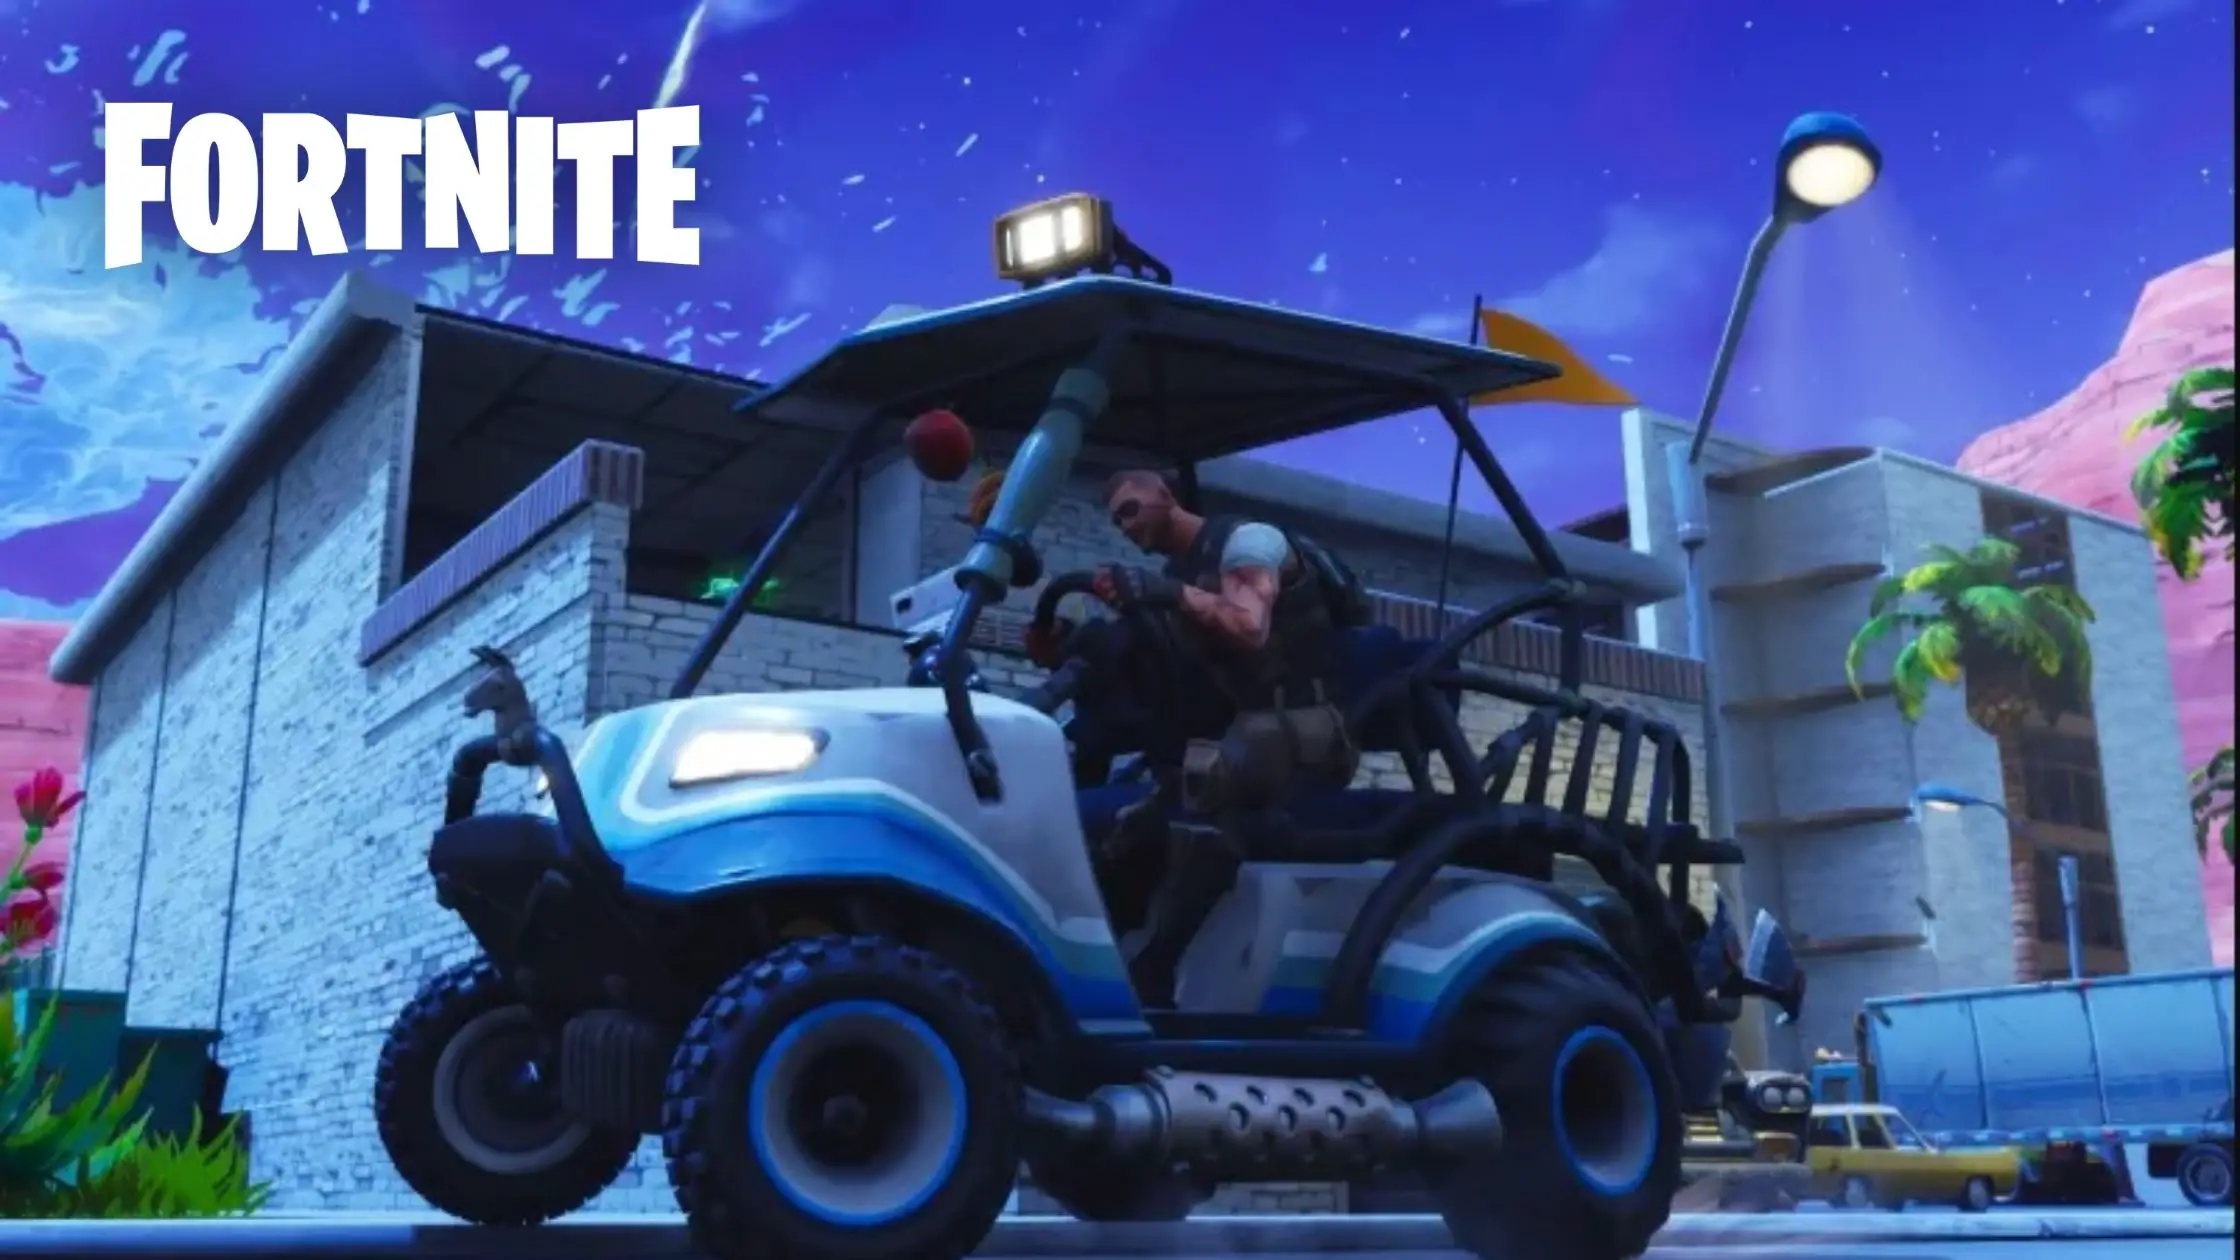 atk-golf-cart-is-returning-to-fortnite-including-other-classic-vehicles